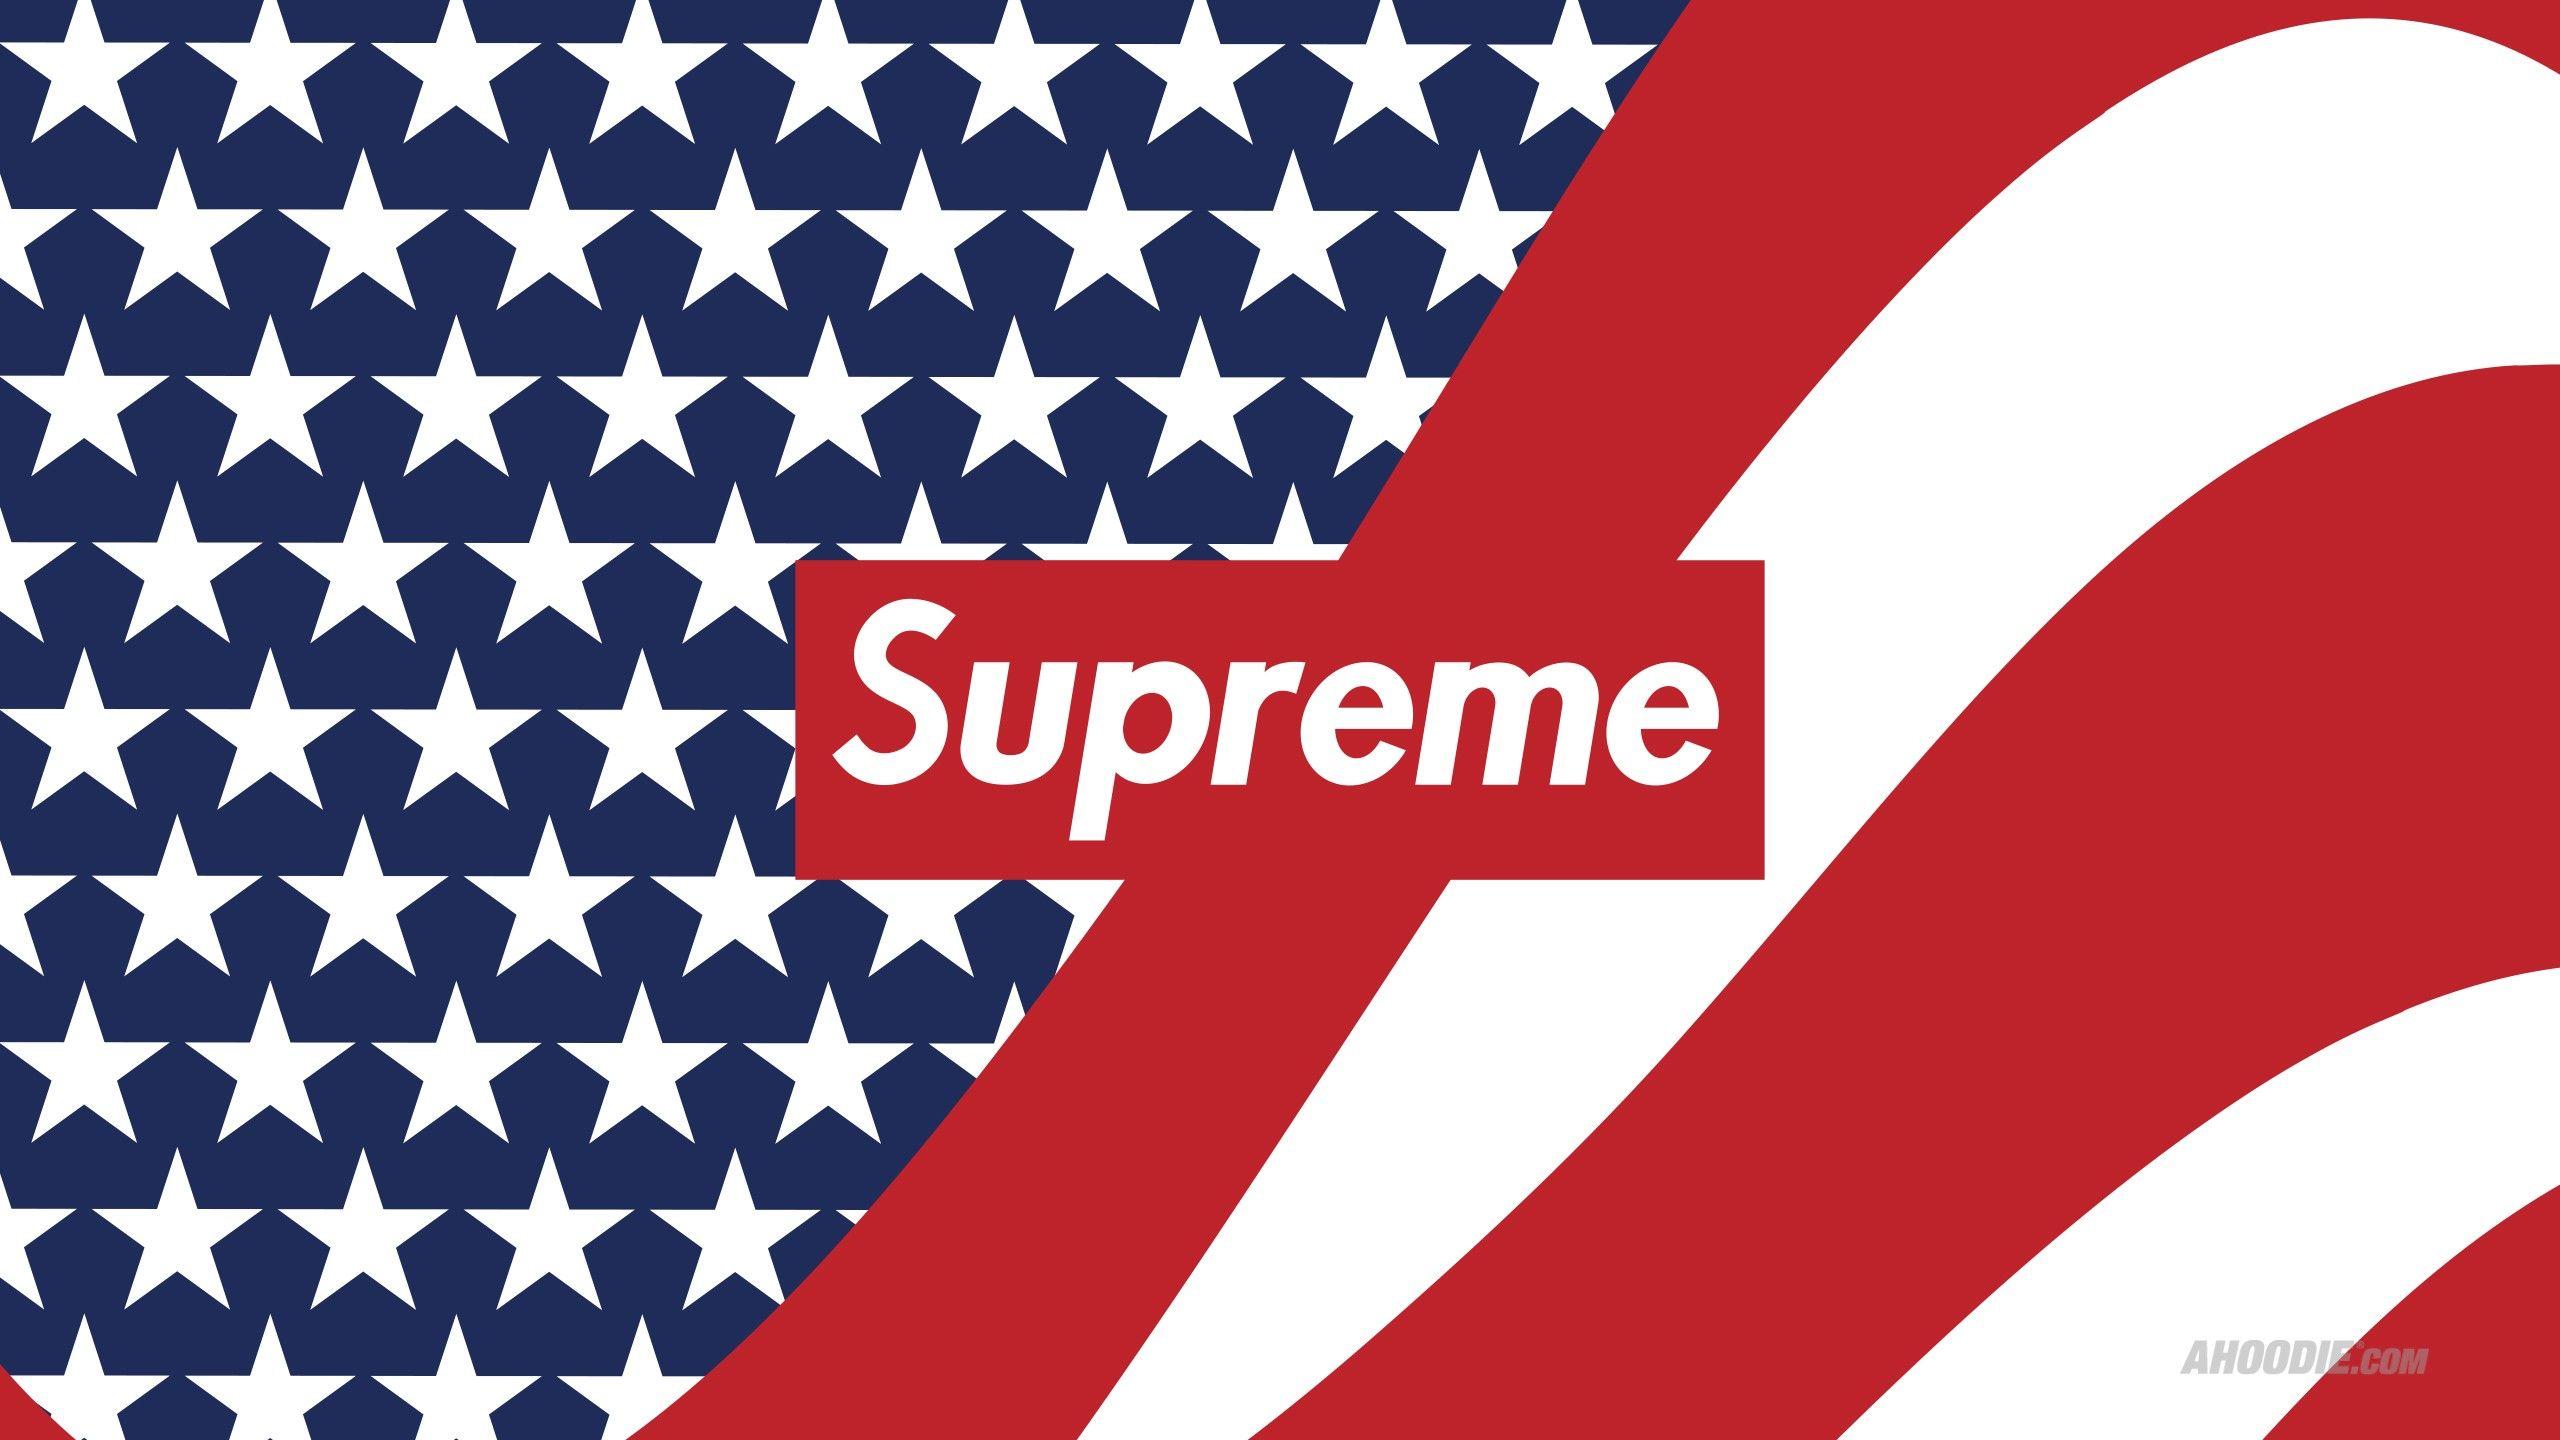 Supreme wallpapers ·① Download free High Resolution backgrounds for